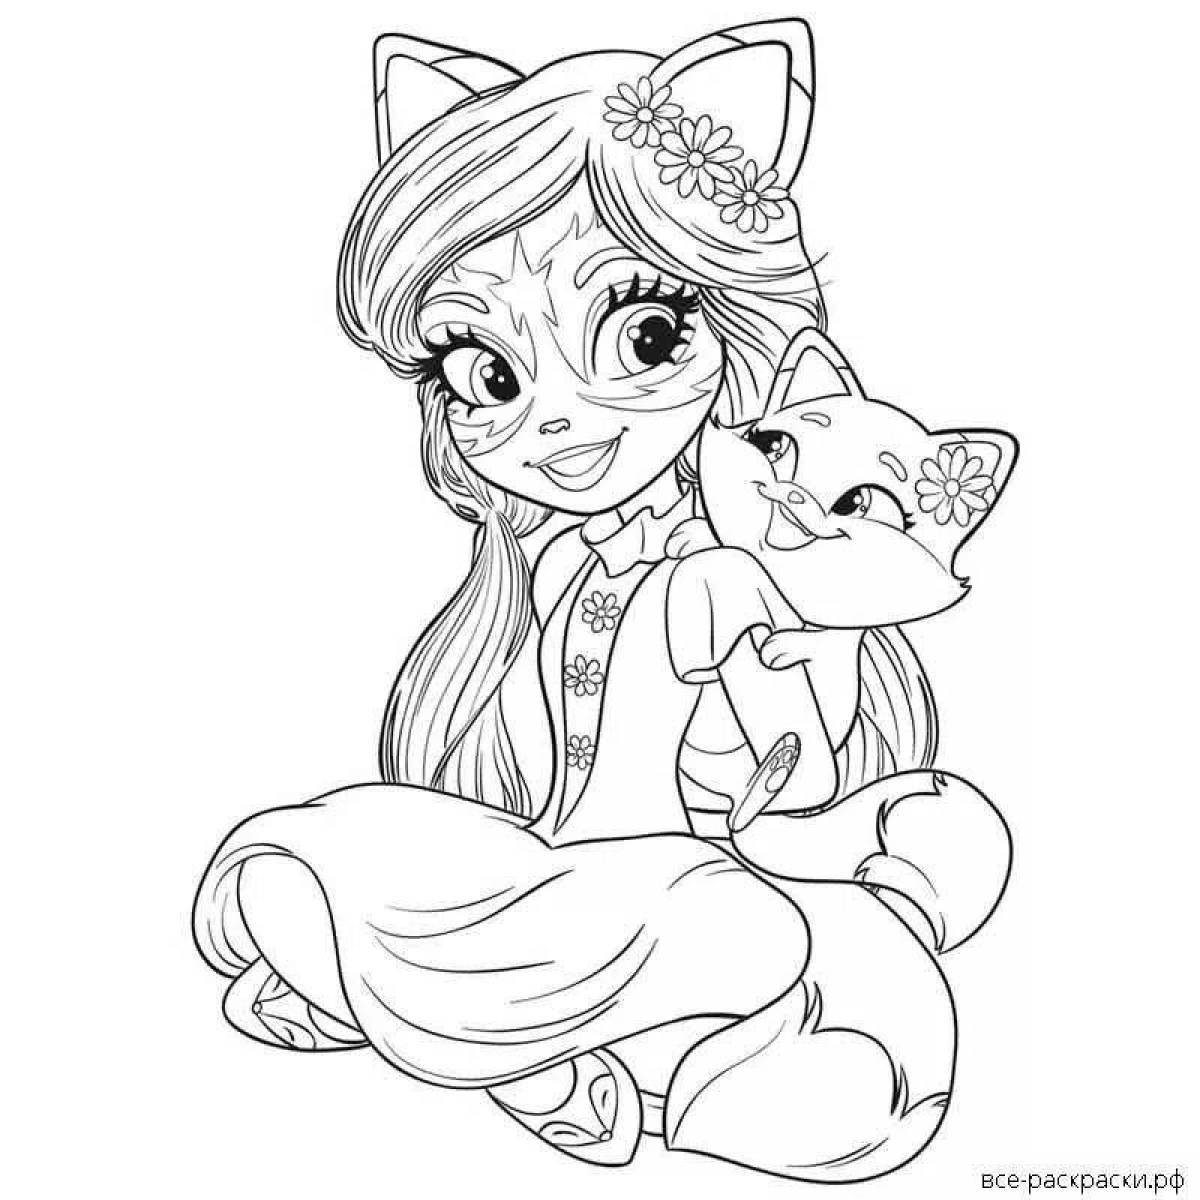 Elegant enchenchimals coloring pages